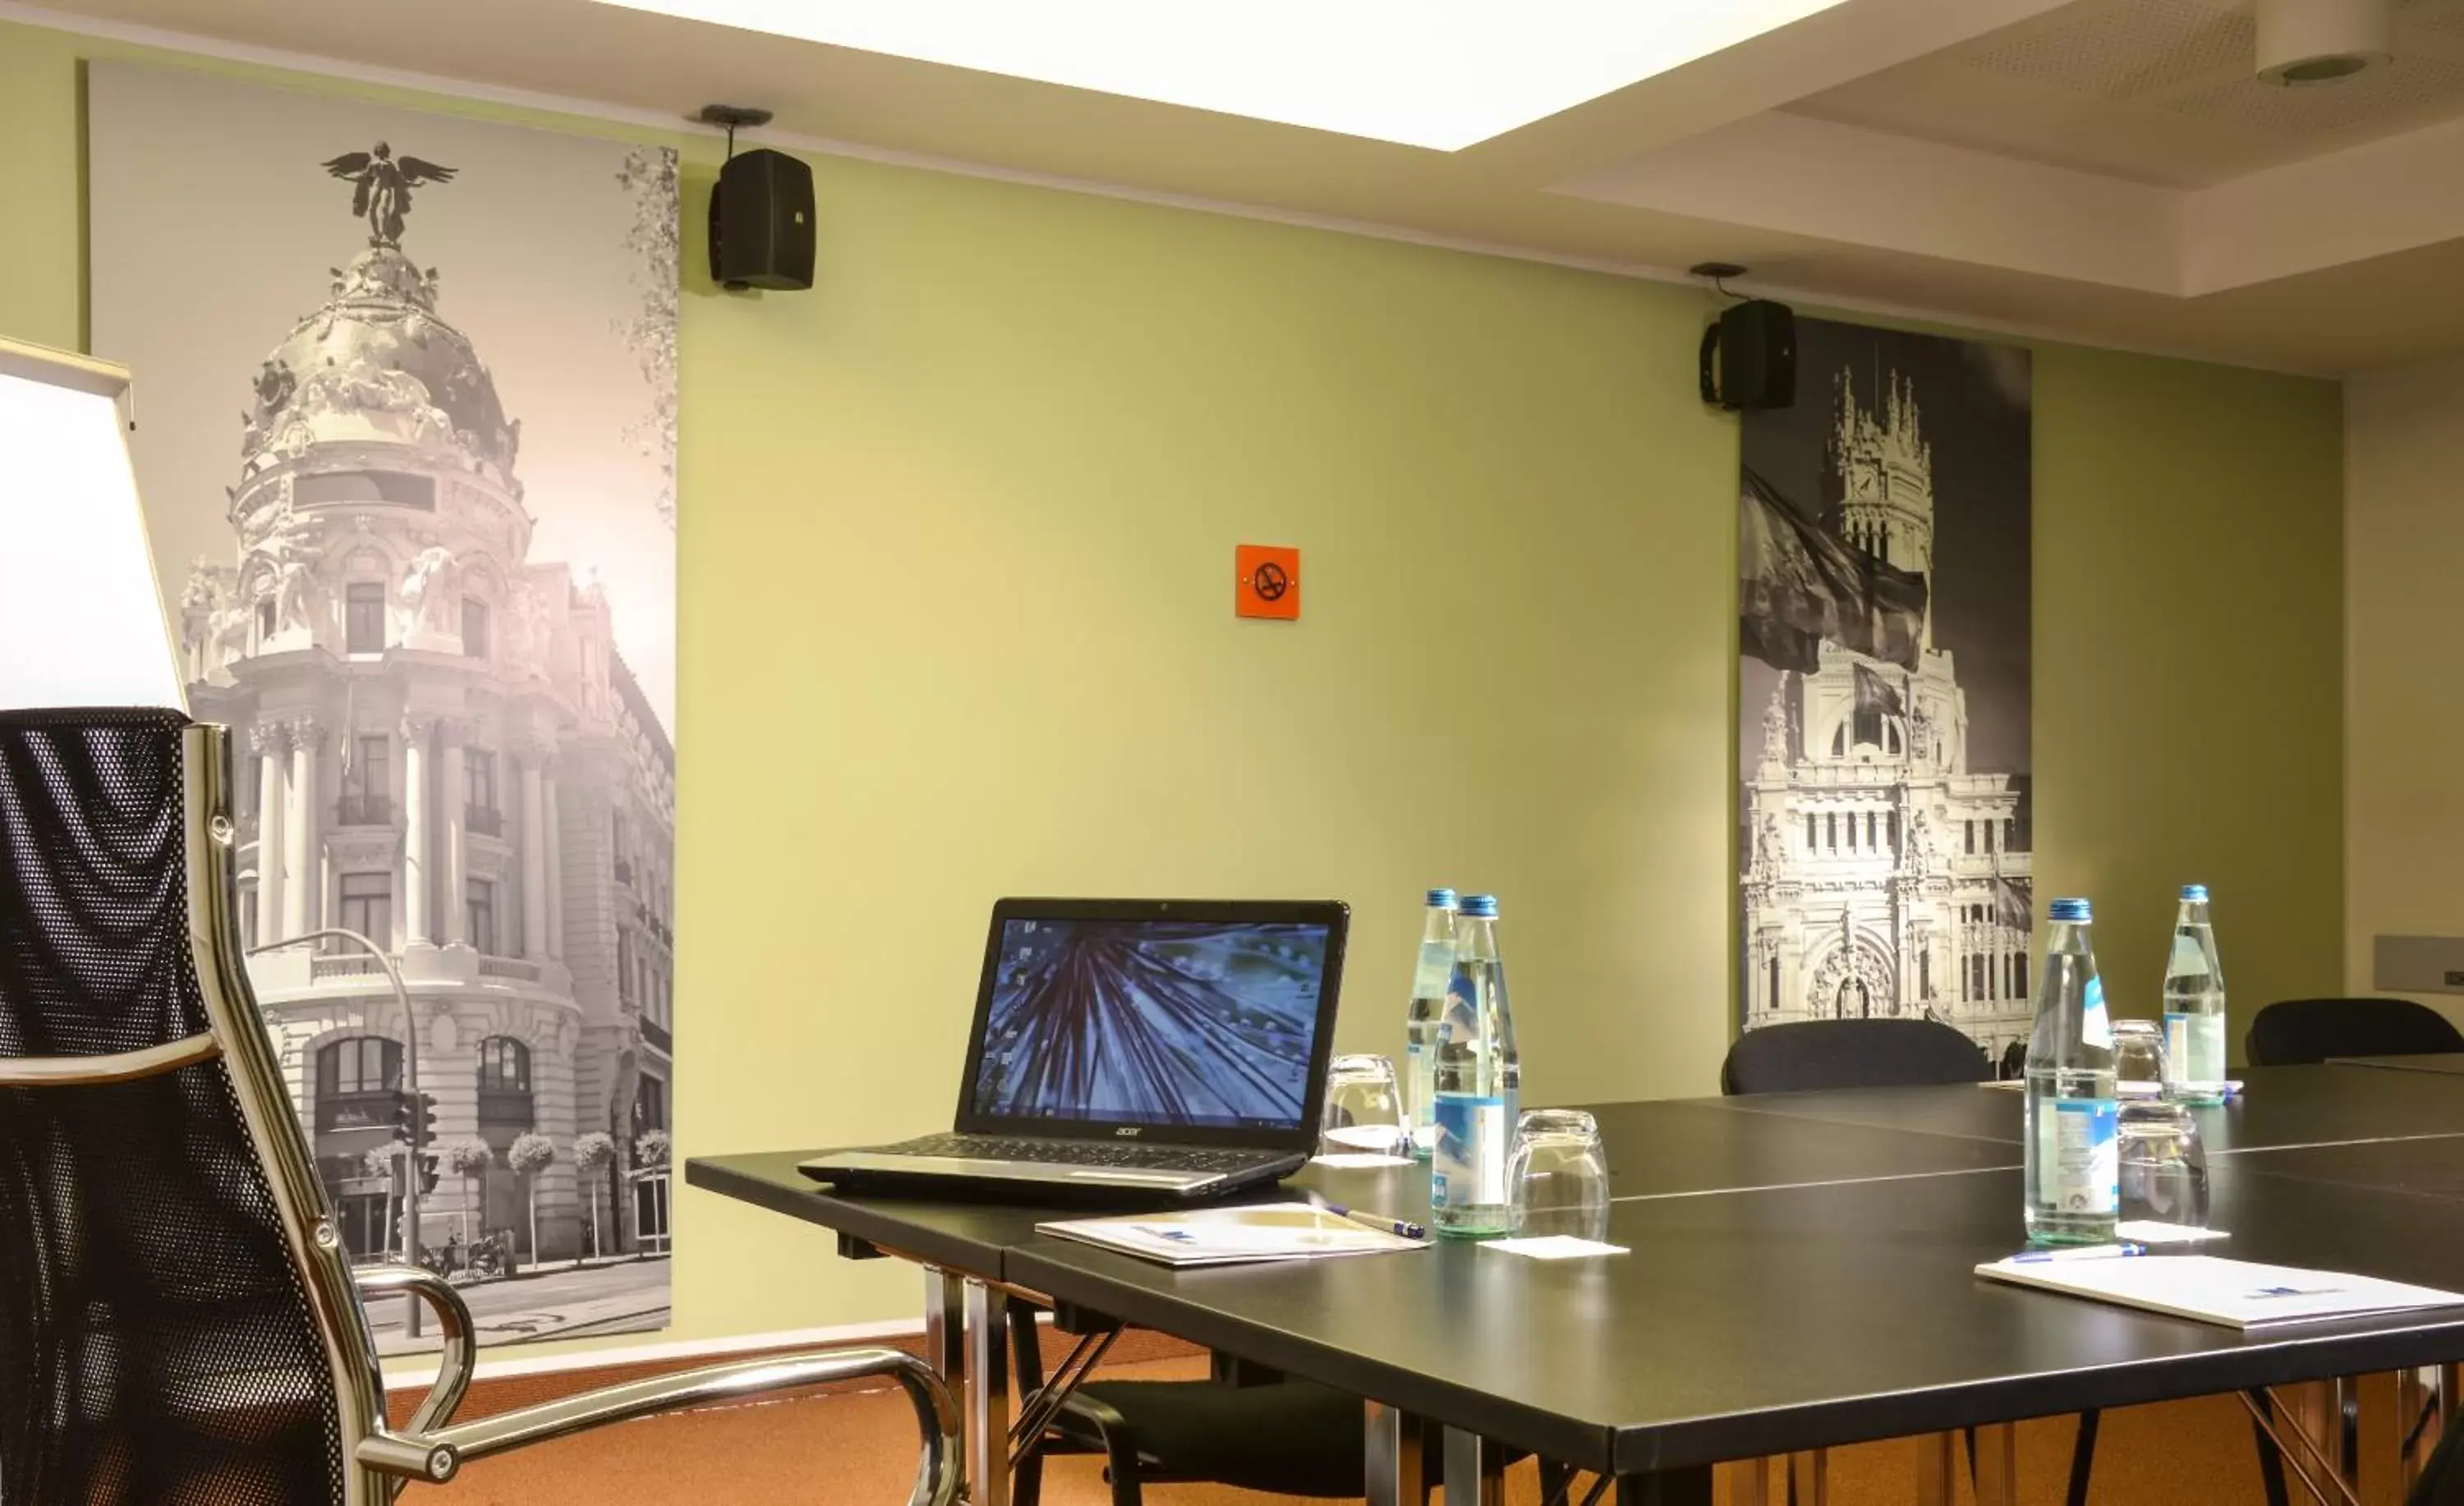 Business facilities in Best Western Plus Hotel Expo